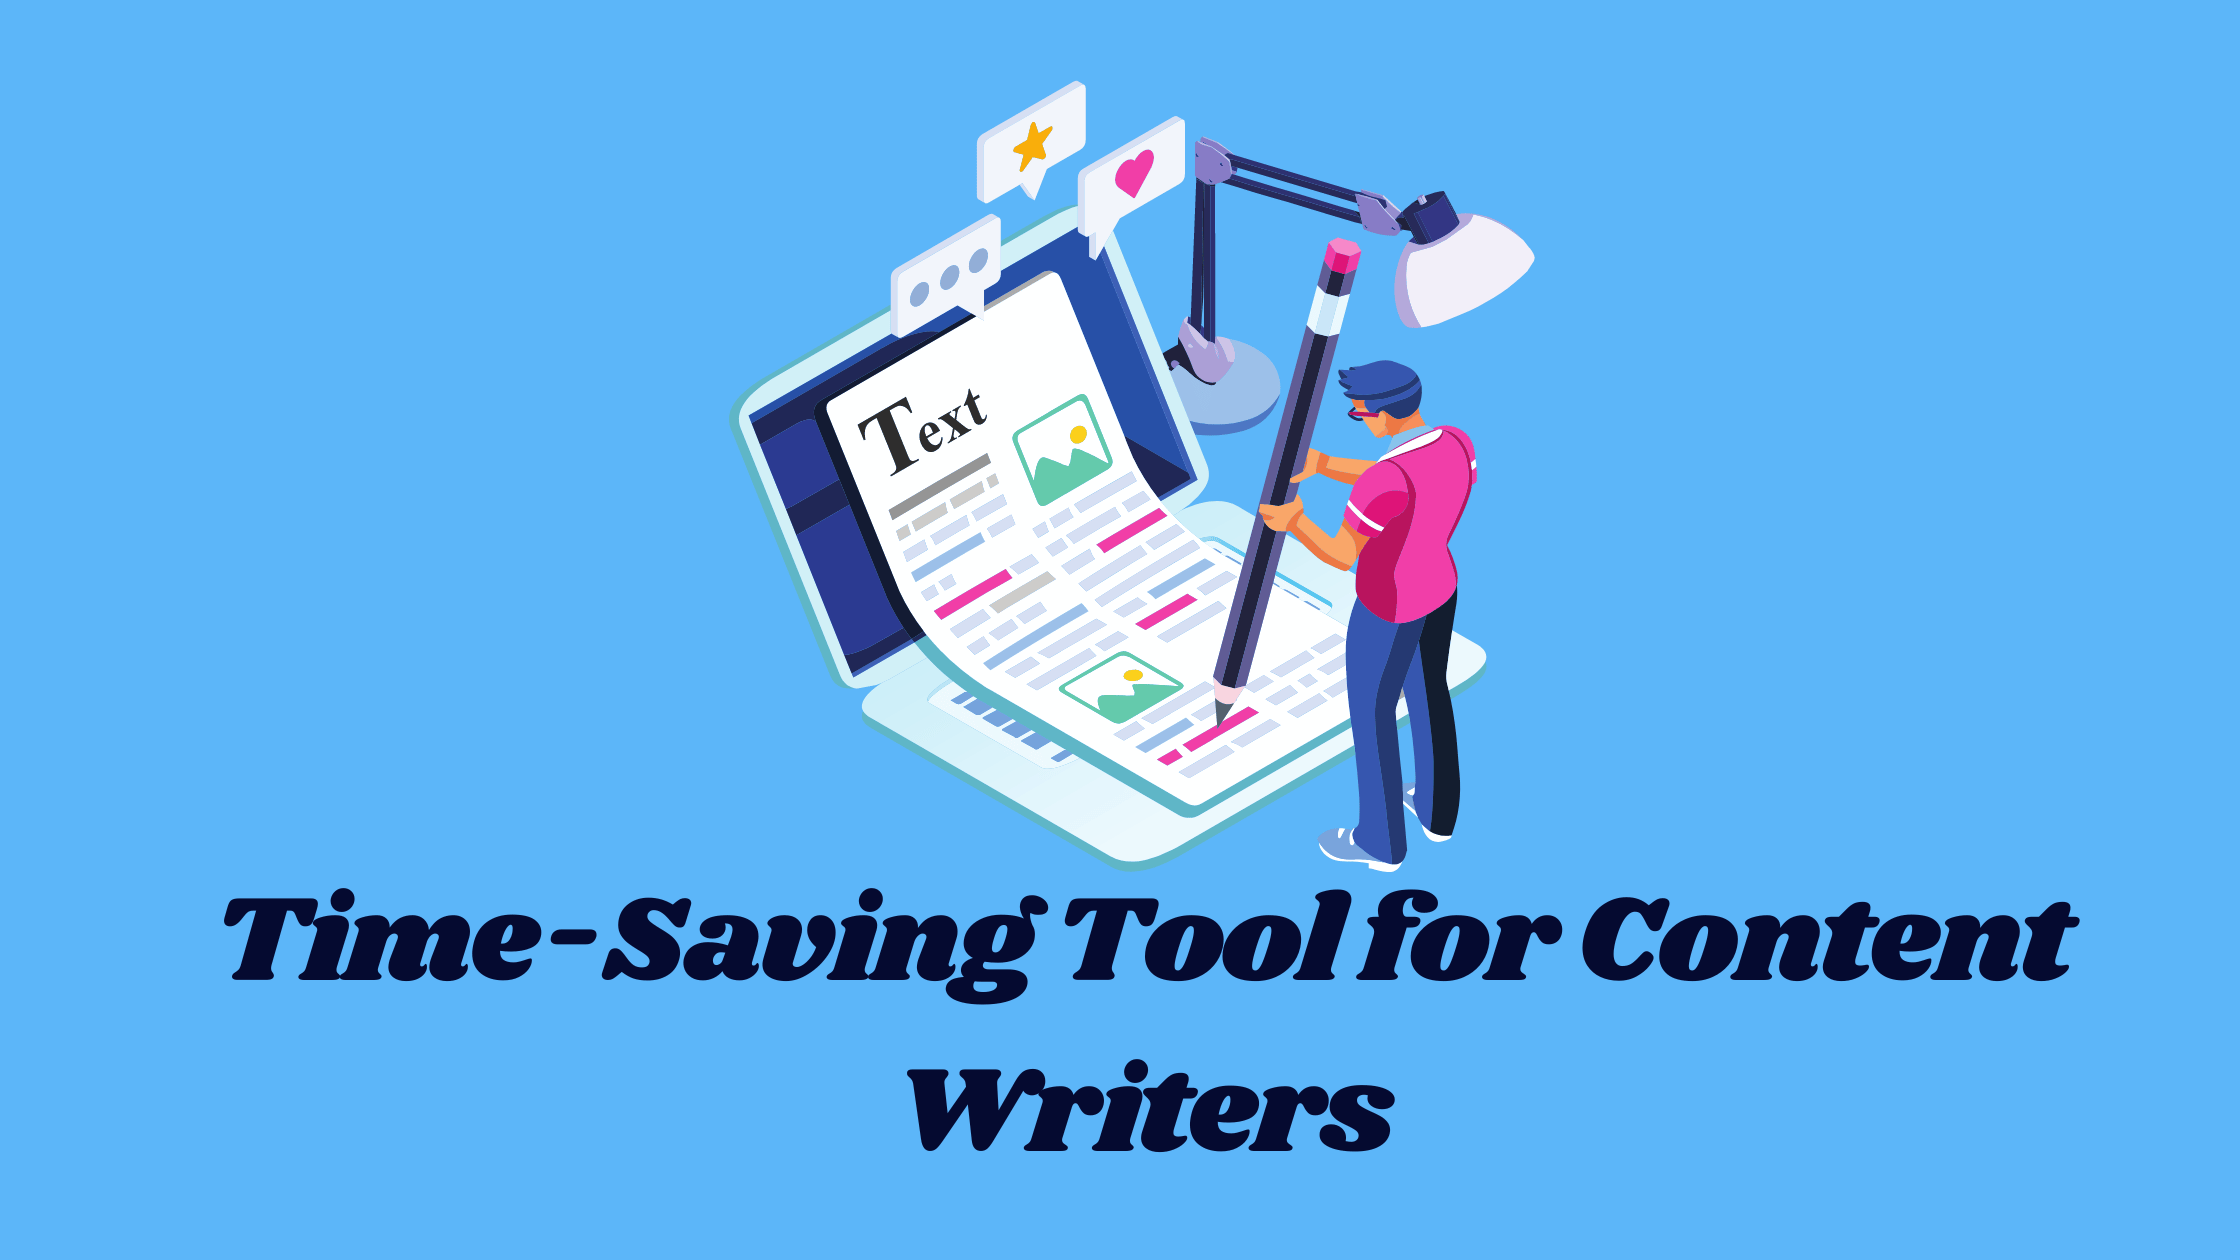 Time-Saving Tool for Content Writers